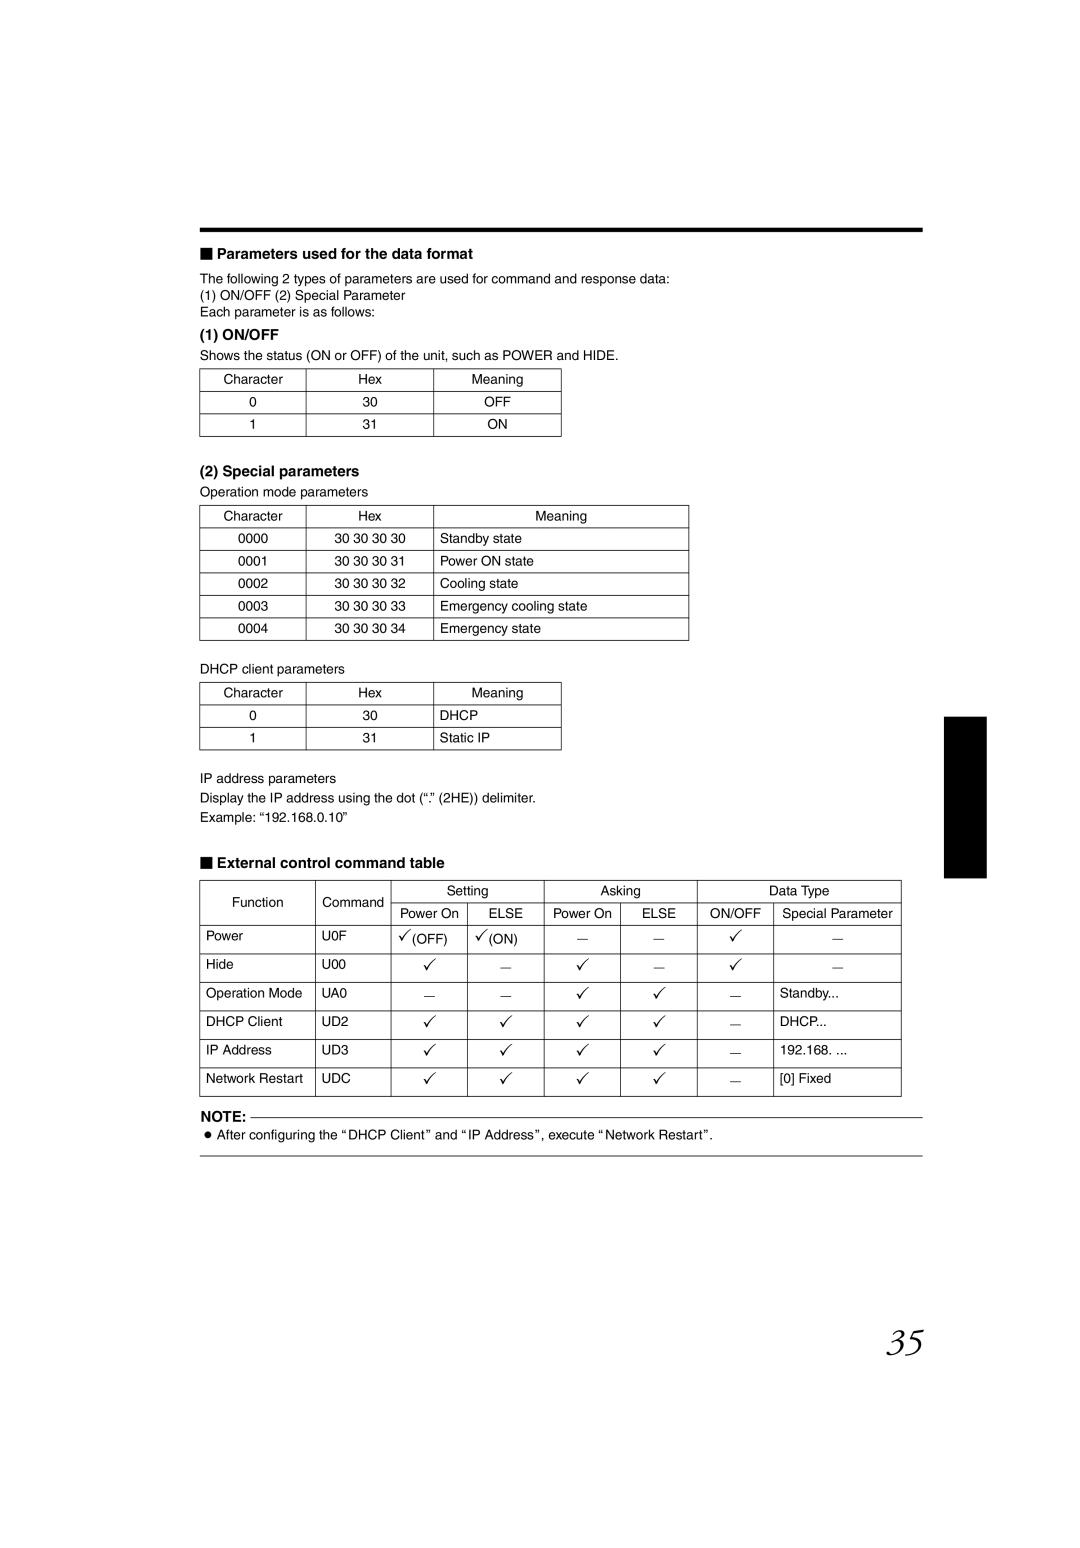 JVC DLA-SH4K instruction manual  Parameters used for the data format, 1 ON/OFF,  External control command table 